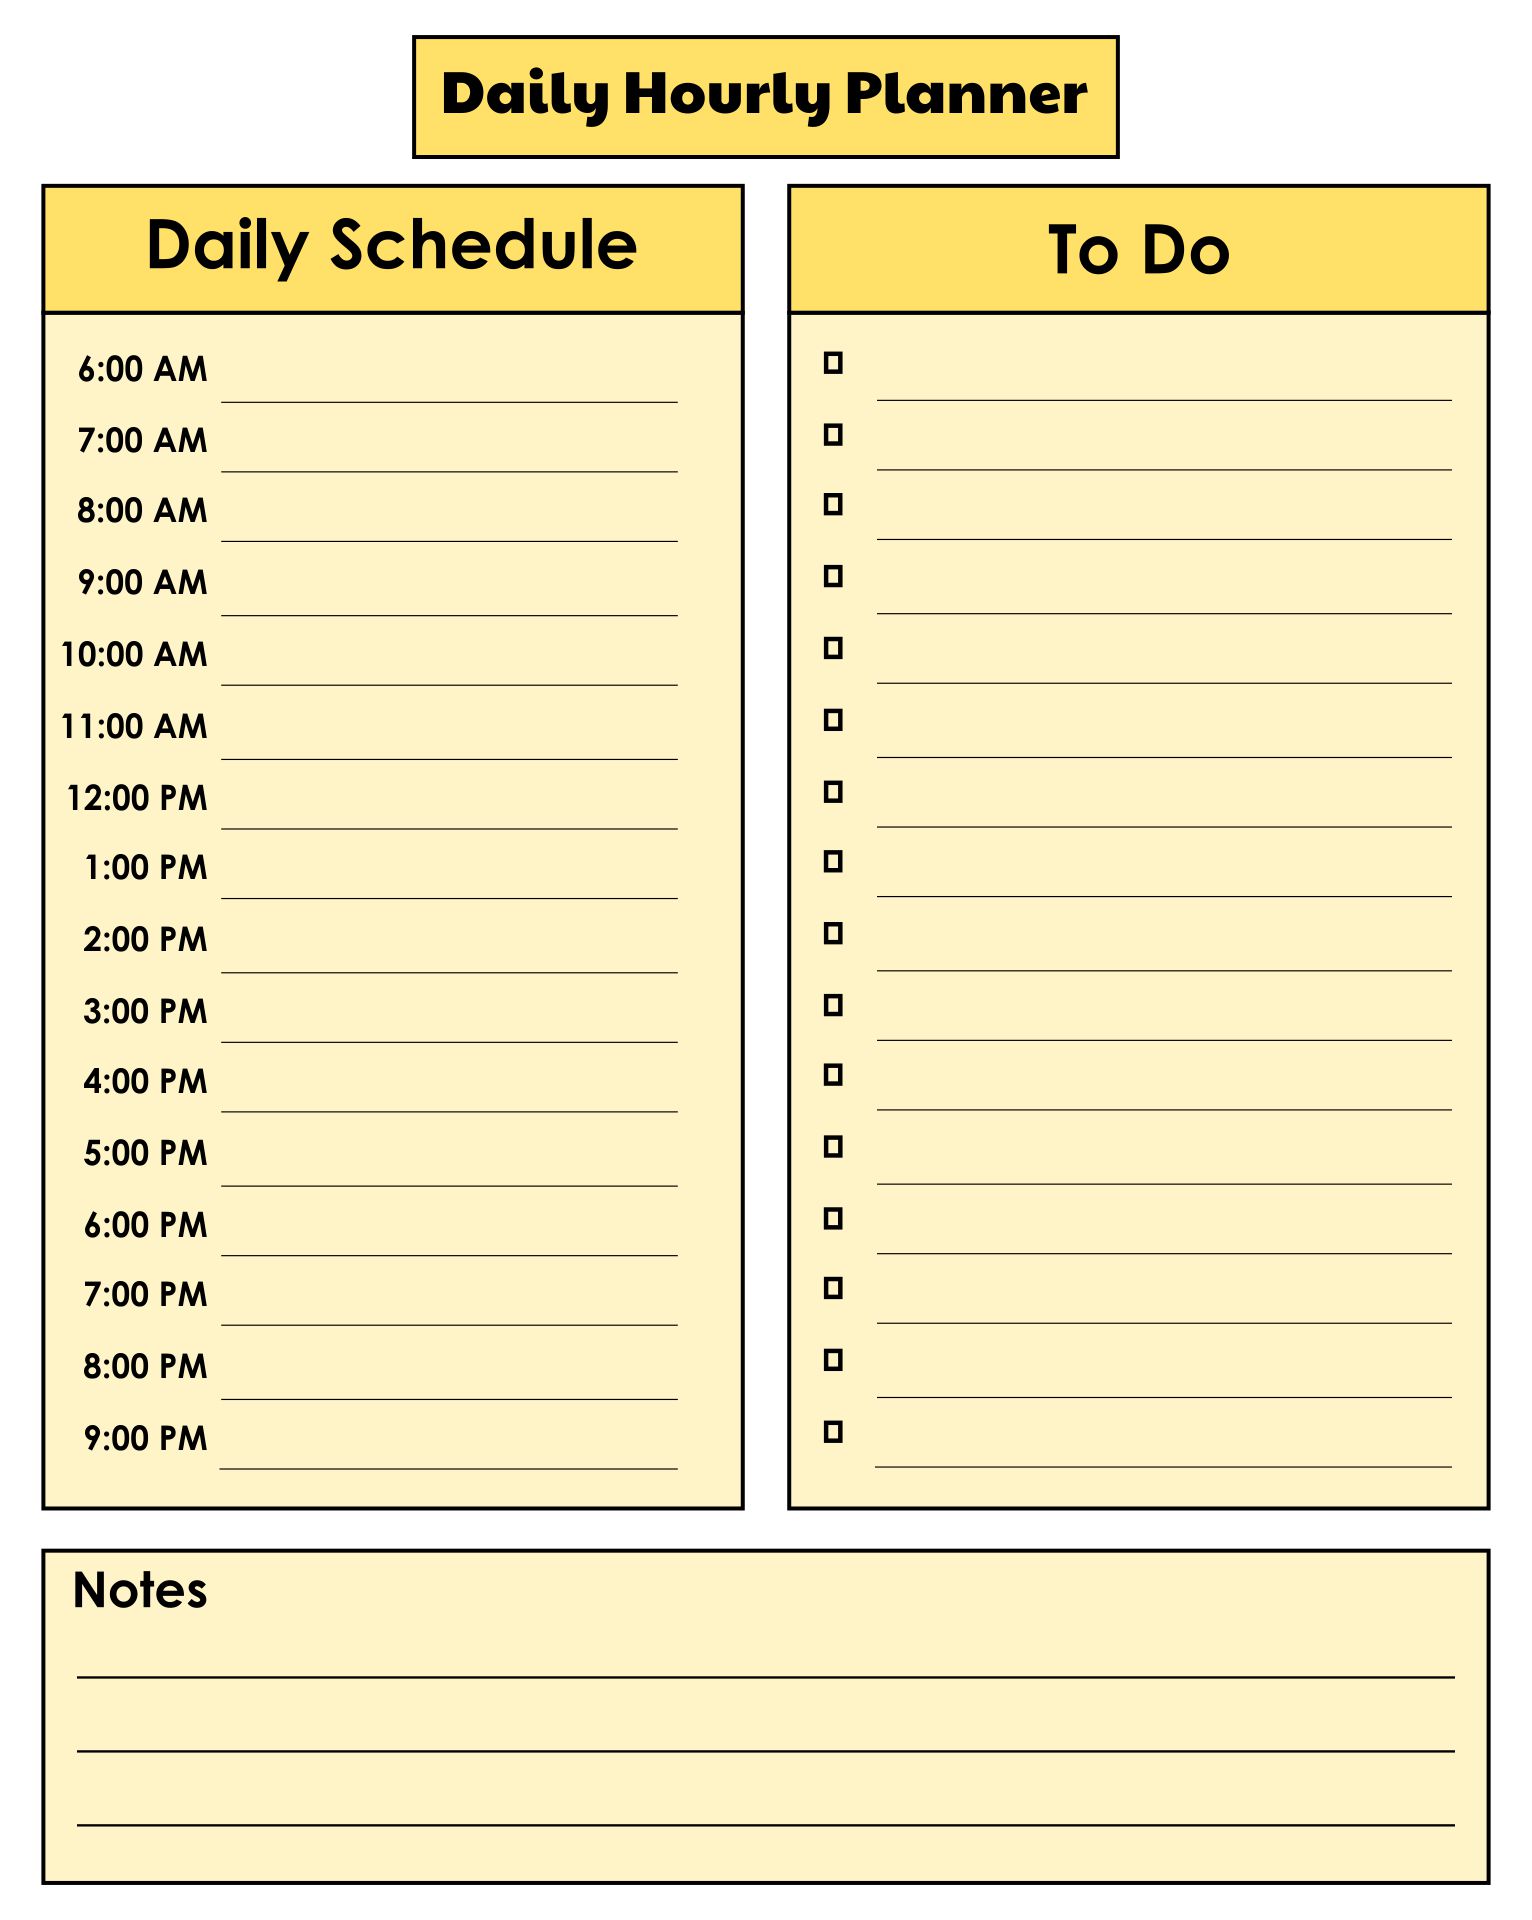 Printable Daily Hourly Planner Template